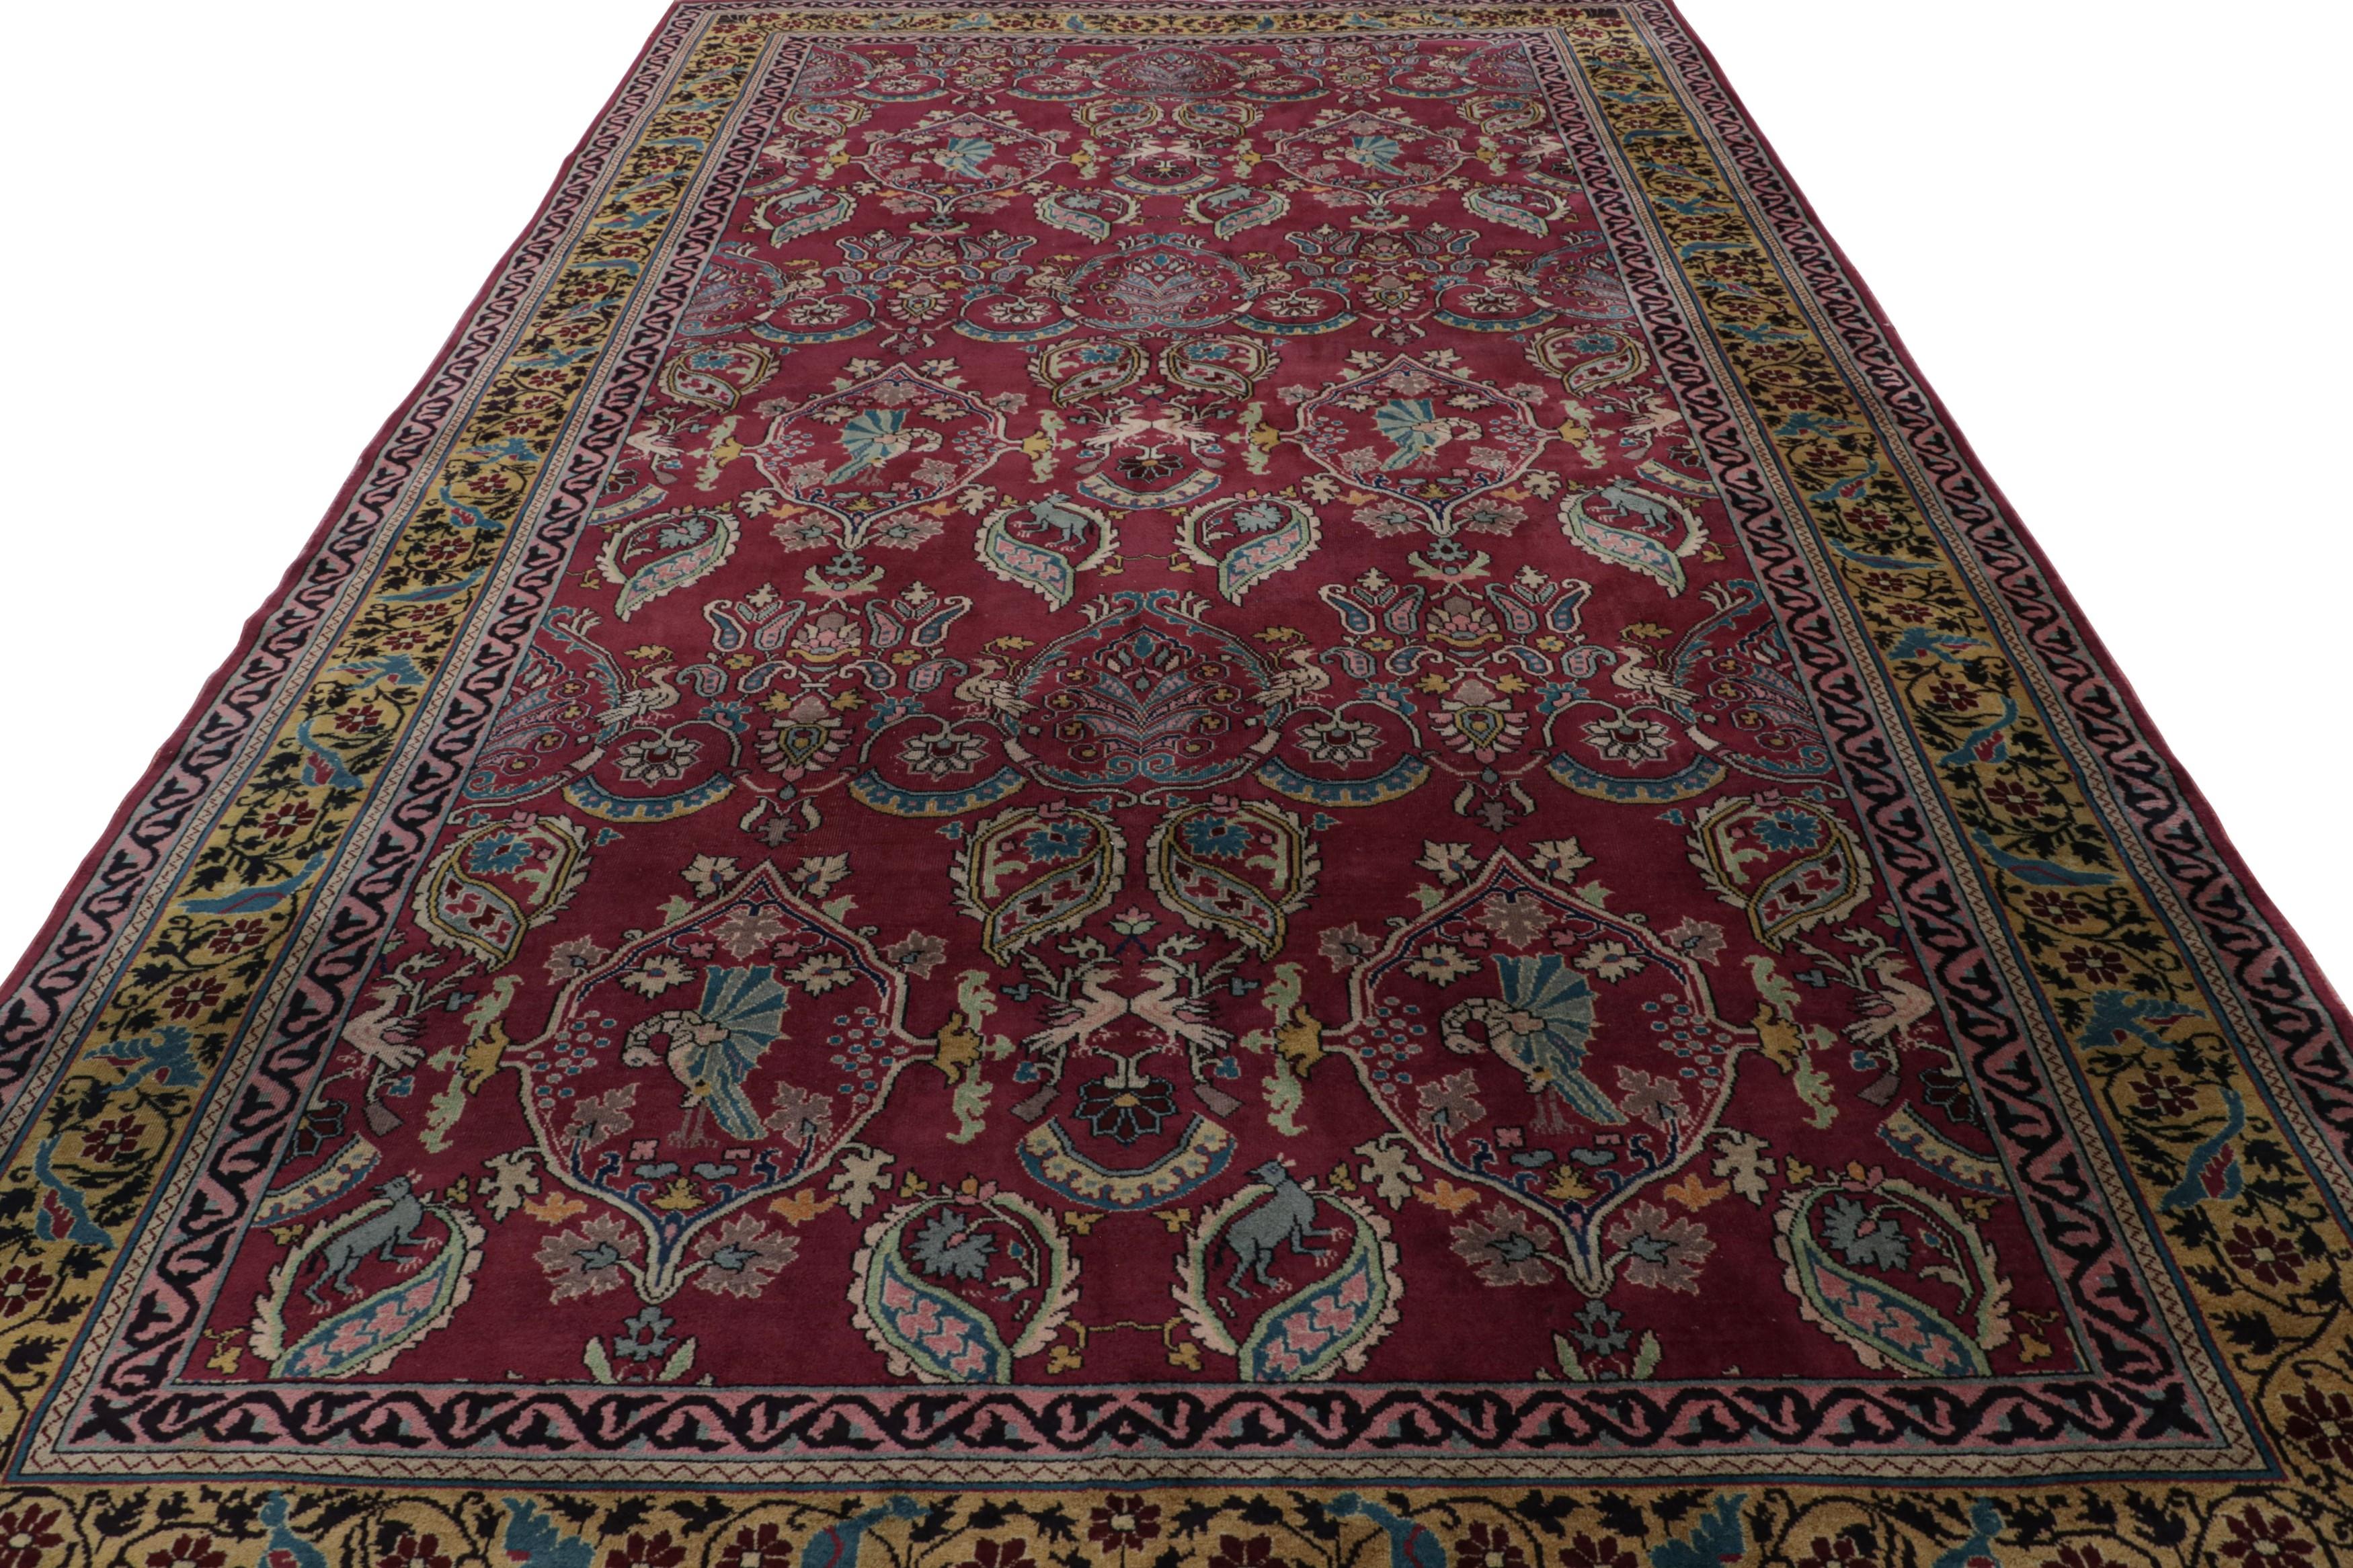 Hand-knotted in wool, an antique 9x16 Indian rug circa 1920-1930

On the Design:

This is a very rare piece, both in its beauty and its design. Possibly a jail rug, with a style much like Khotan Samarkand rugs and an English sensibility in its